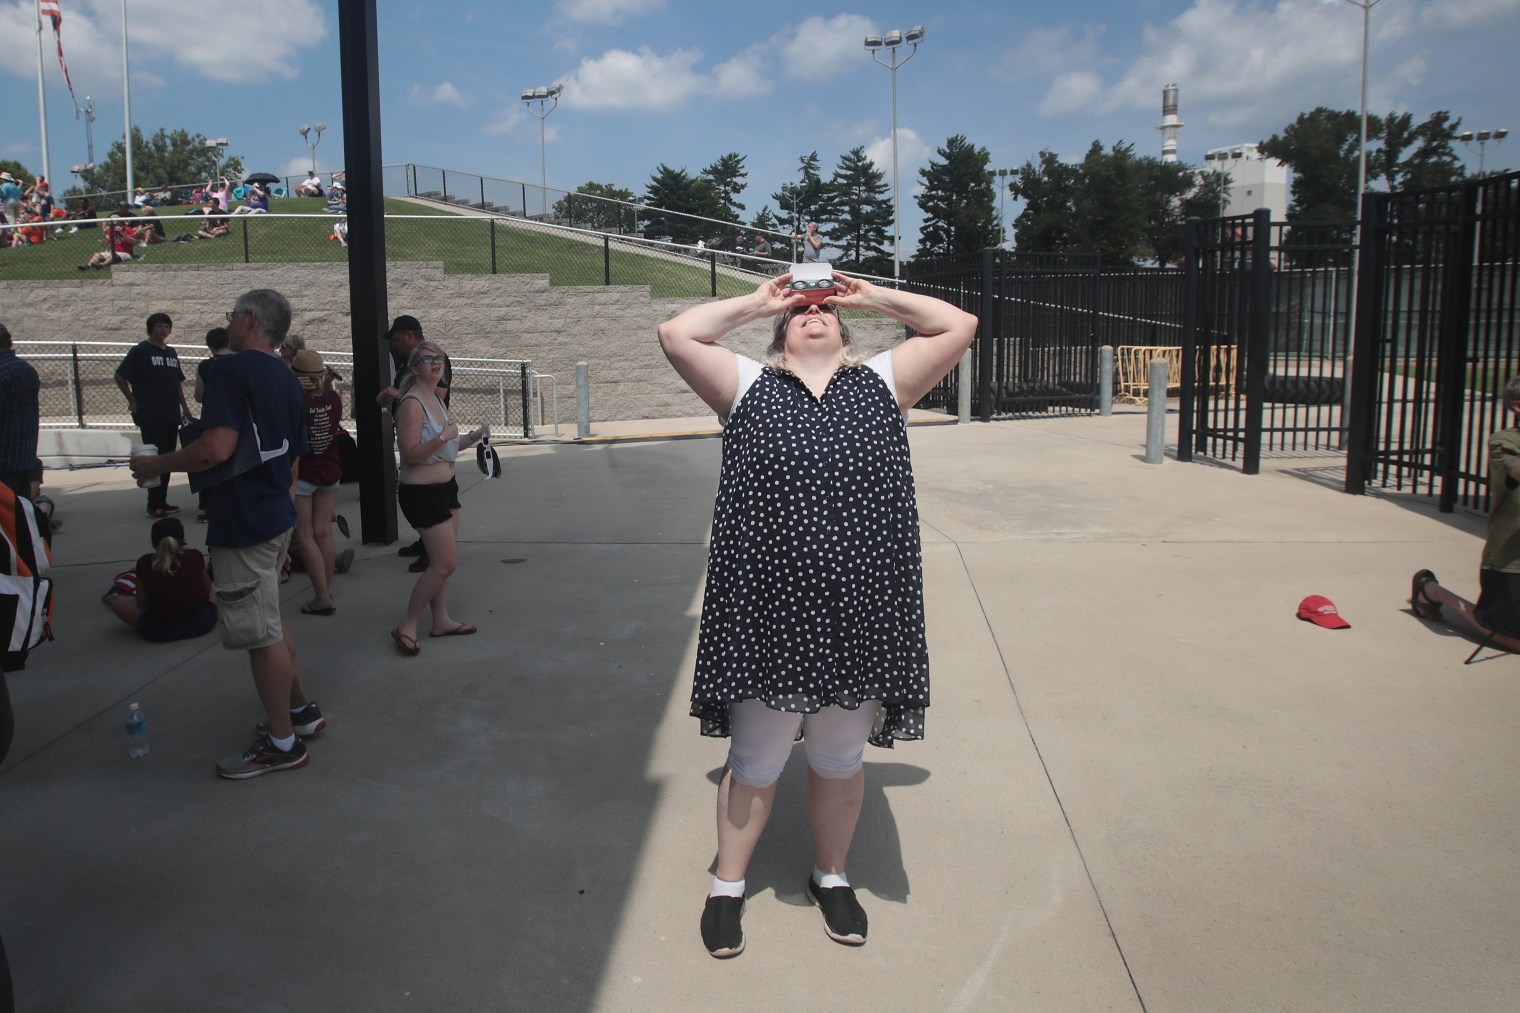 A woman watches the solar eclipse at Saluki Stadium on the campus of Southern Illinois University in Carbondale, Ill., on Aug. 21, 2017.